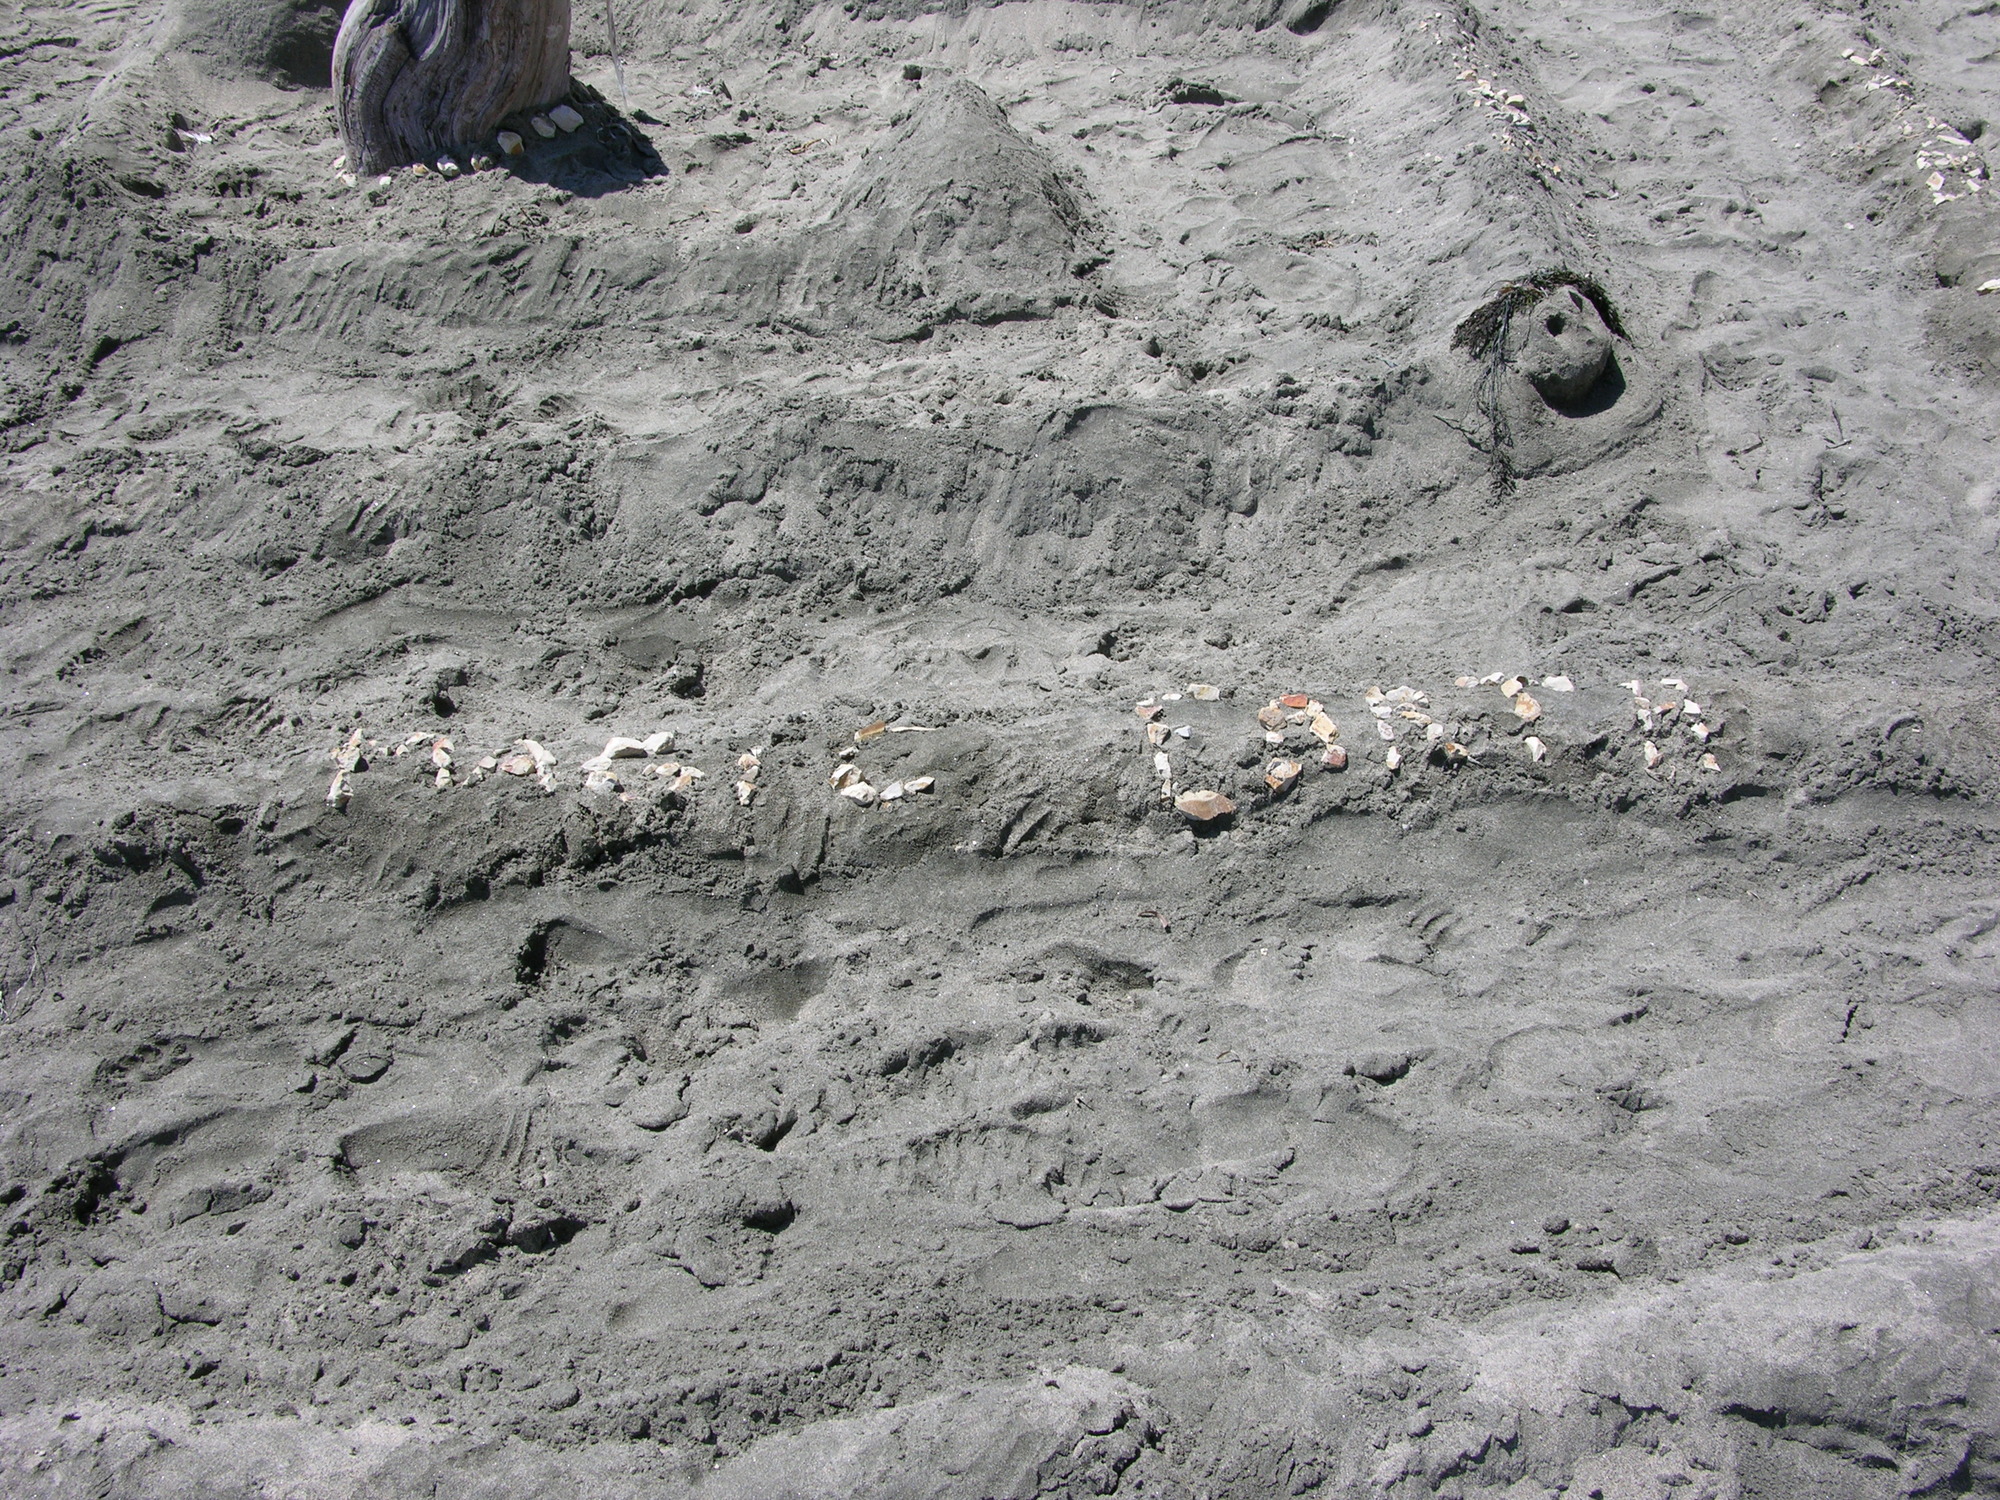 The words magic and Earth written using small rocks on a small ridge made of sand.